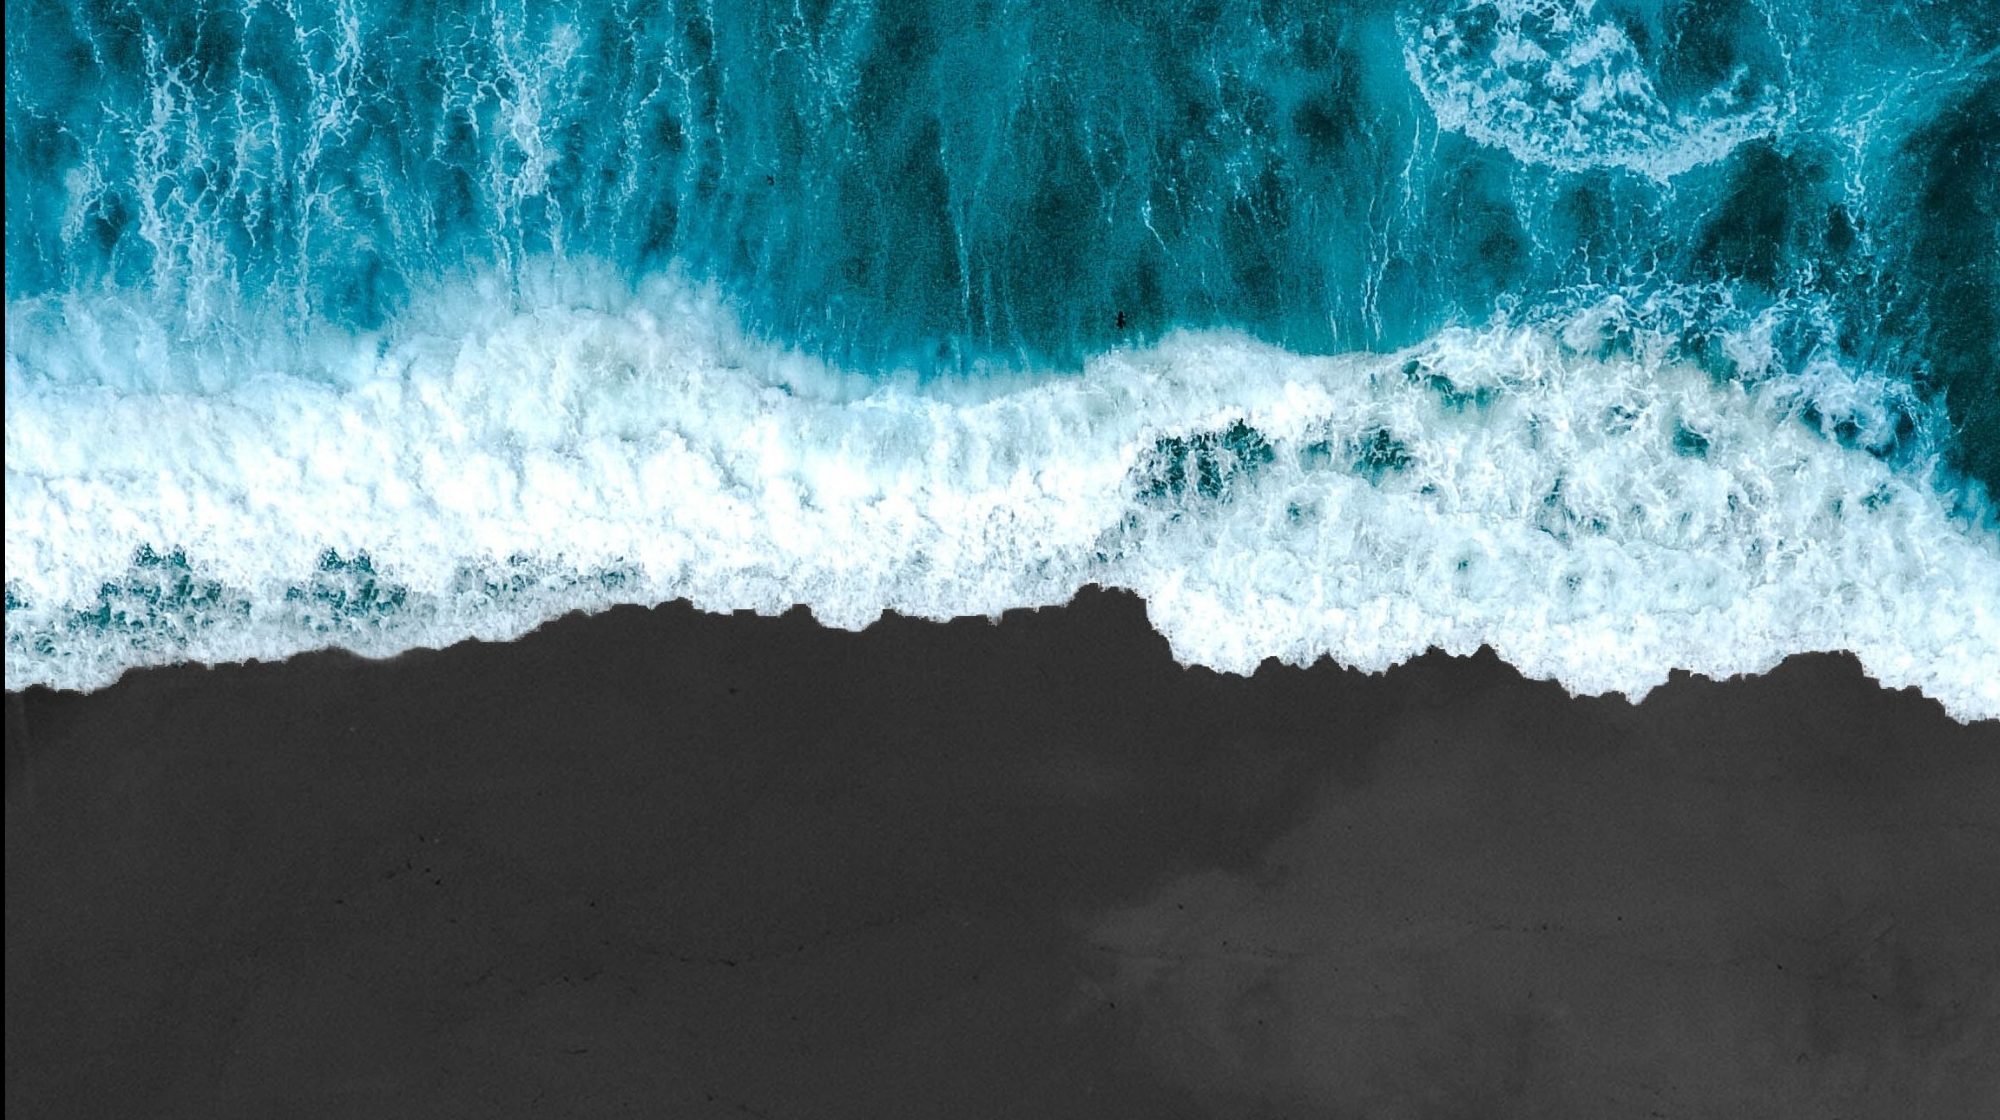 the ocean and the beach from an overhead perspective